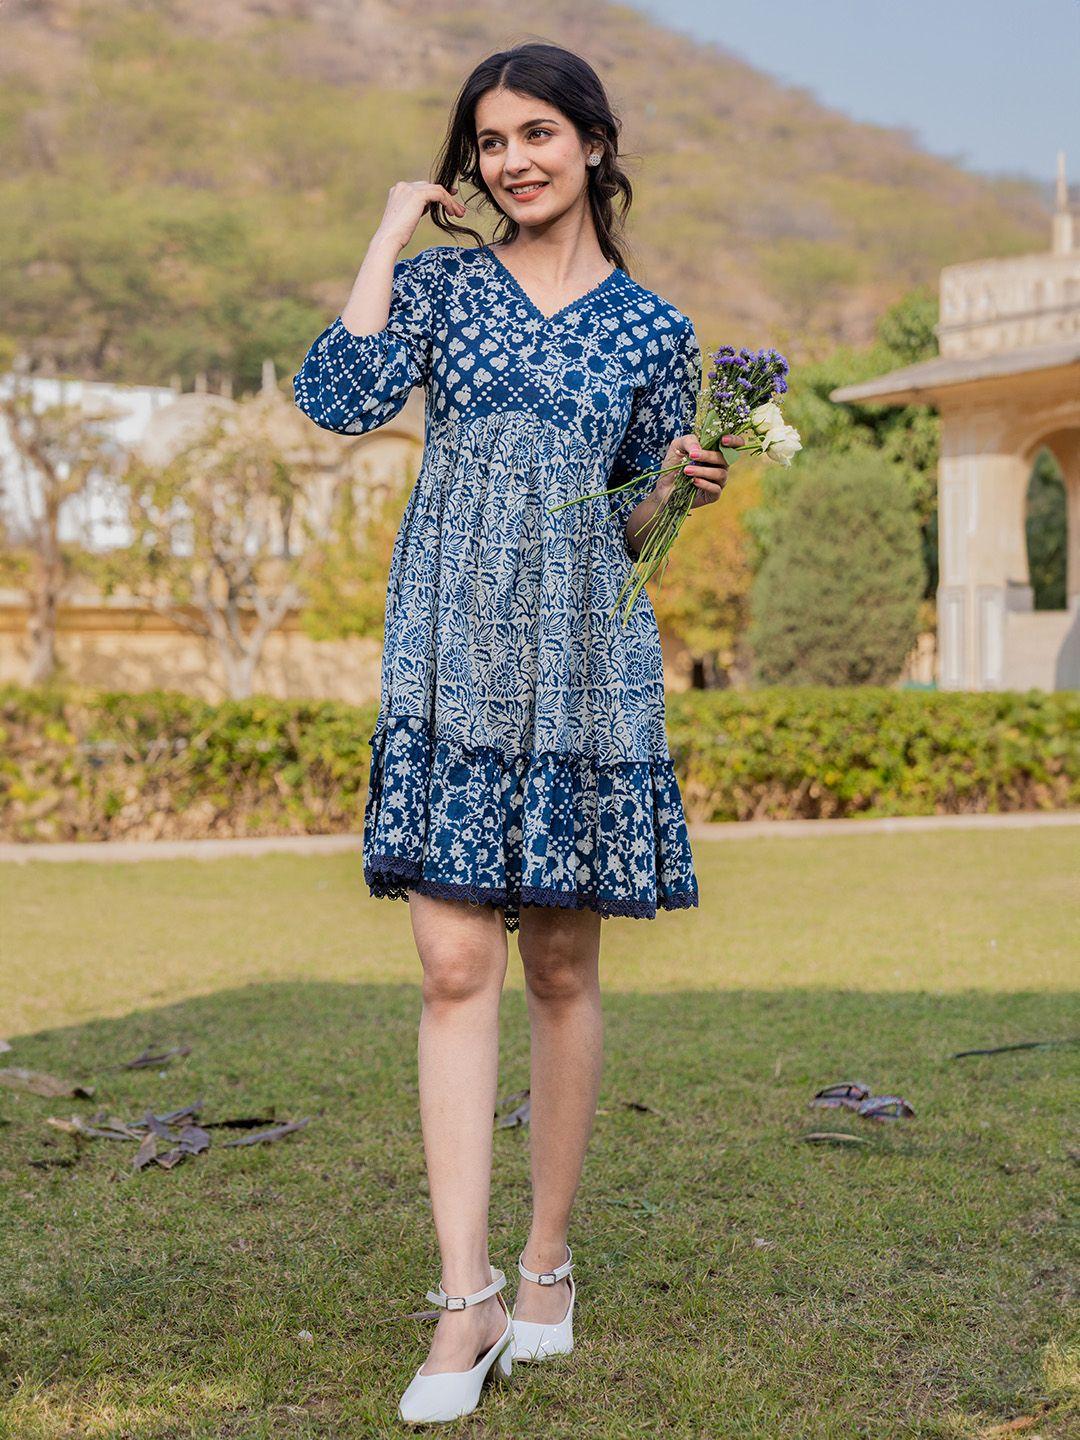 yufta floral printed v-neck lace inserts cotton fit & flare dress